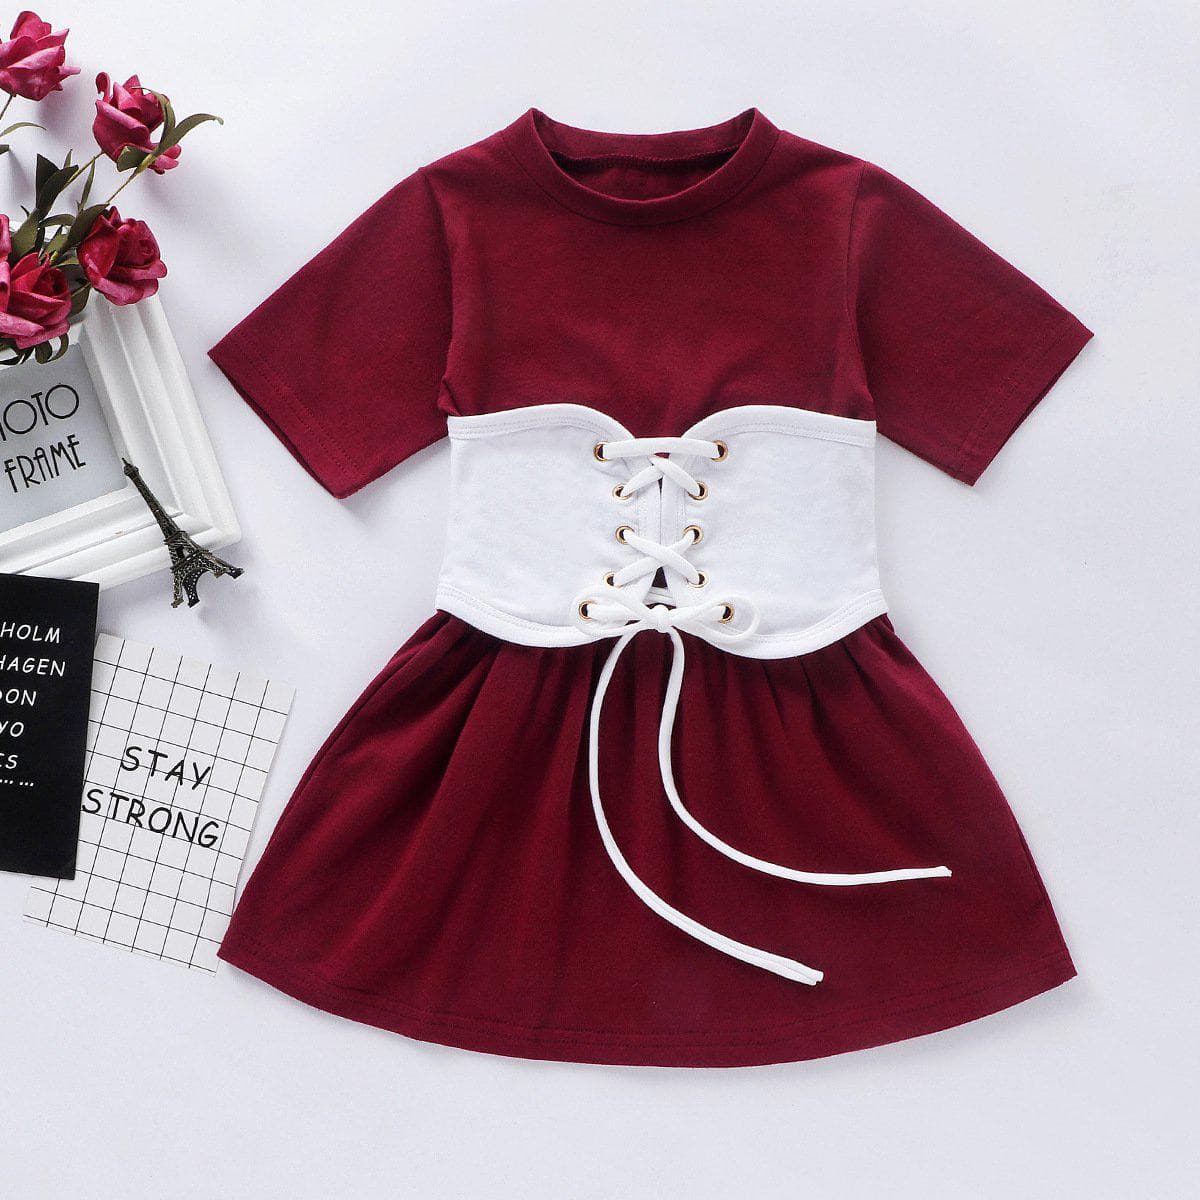 10 Stylish Tips for Dressing Your Baby Girl | TODAY'S PICK UP | UNIQLO IN